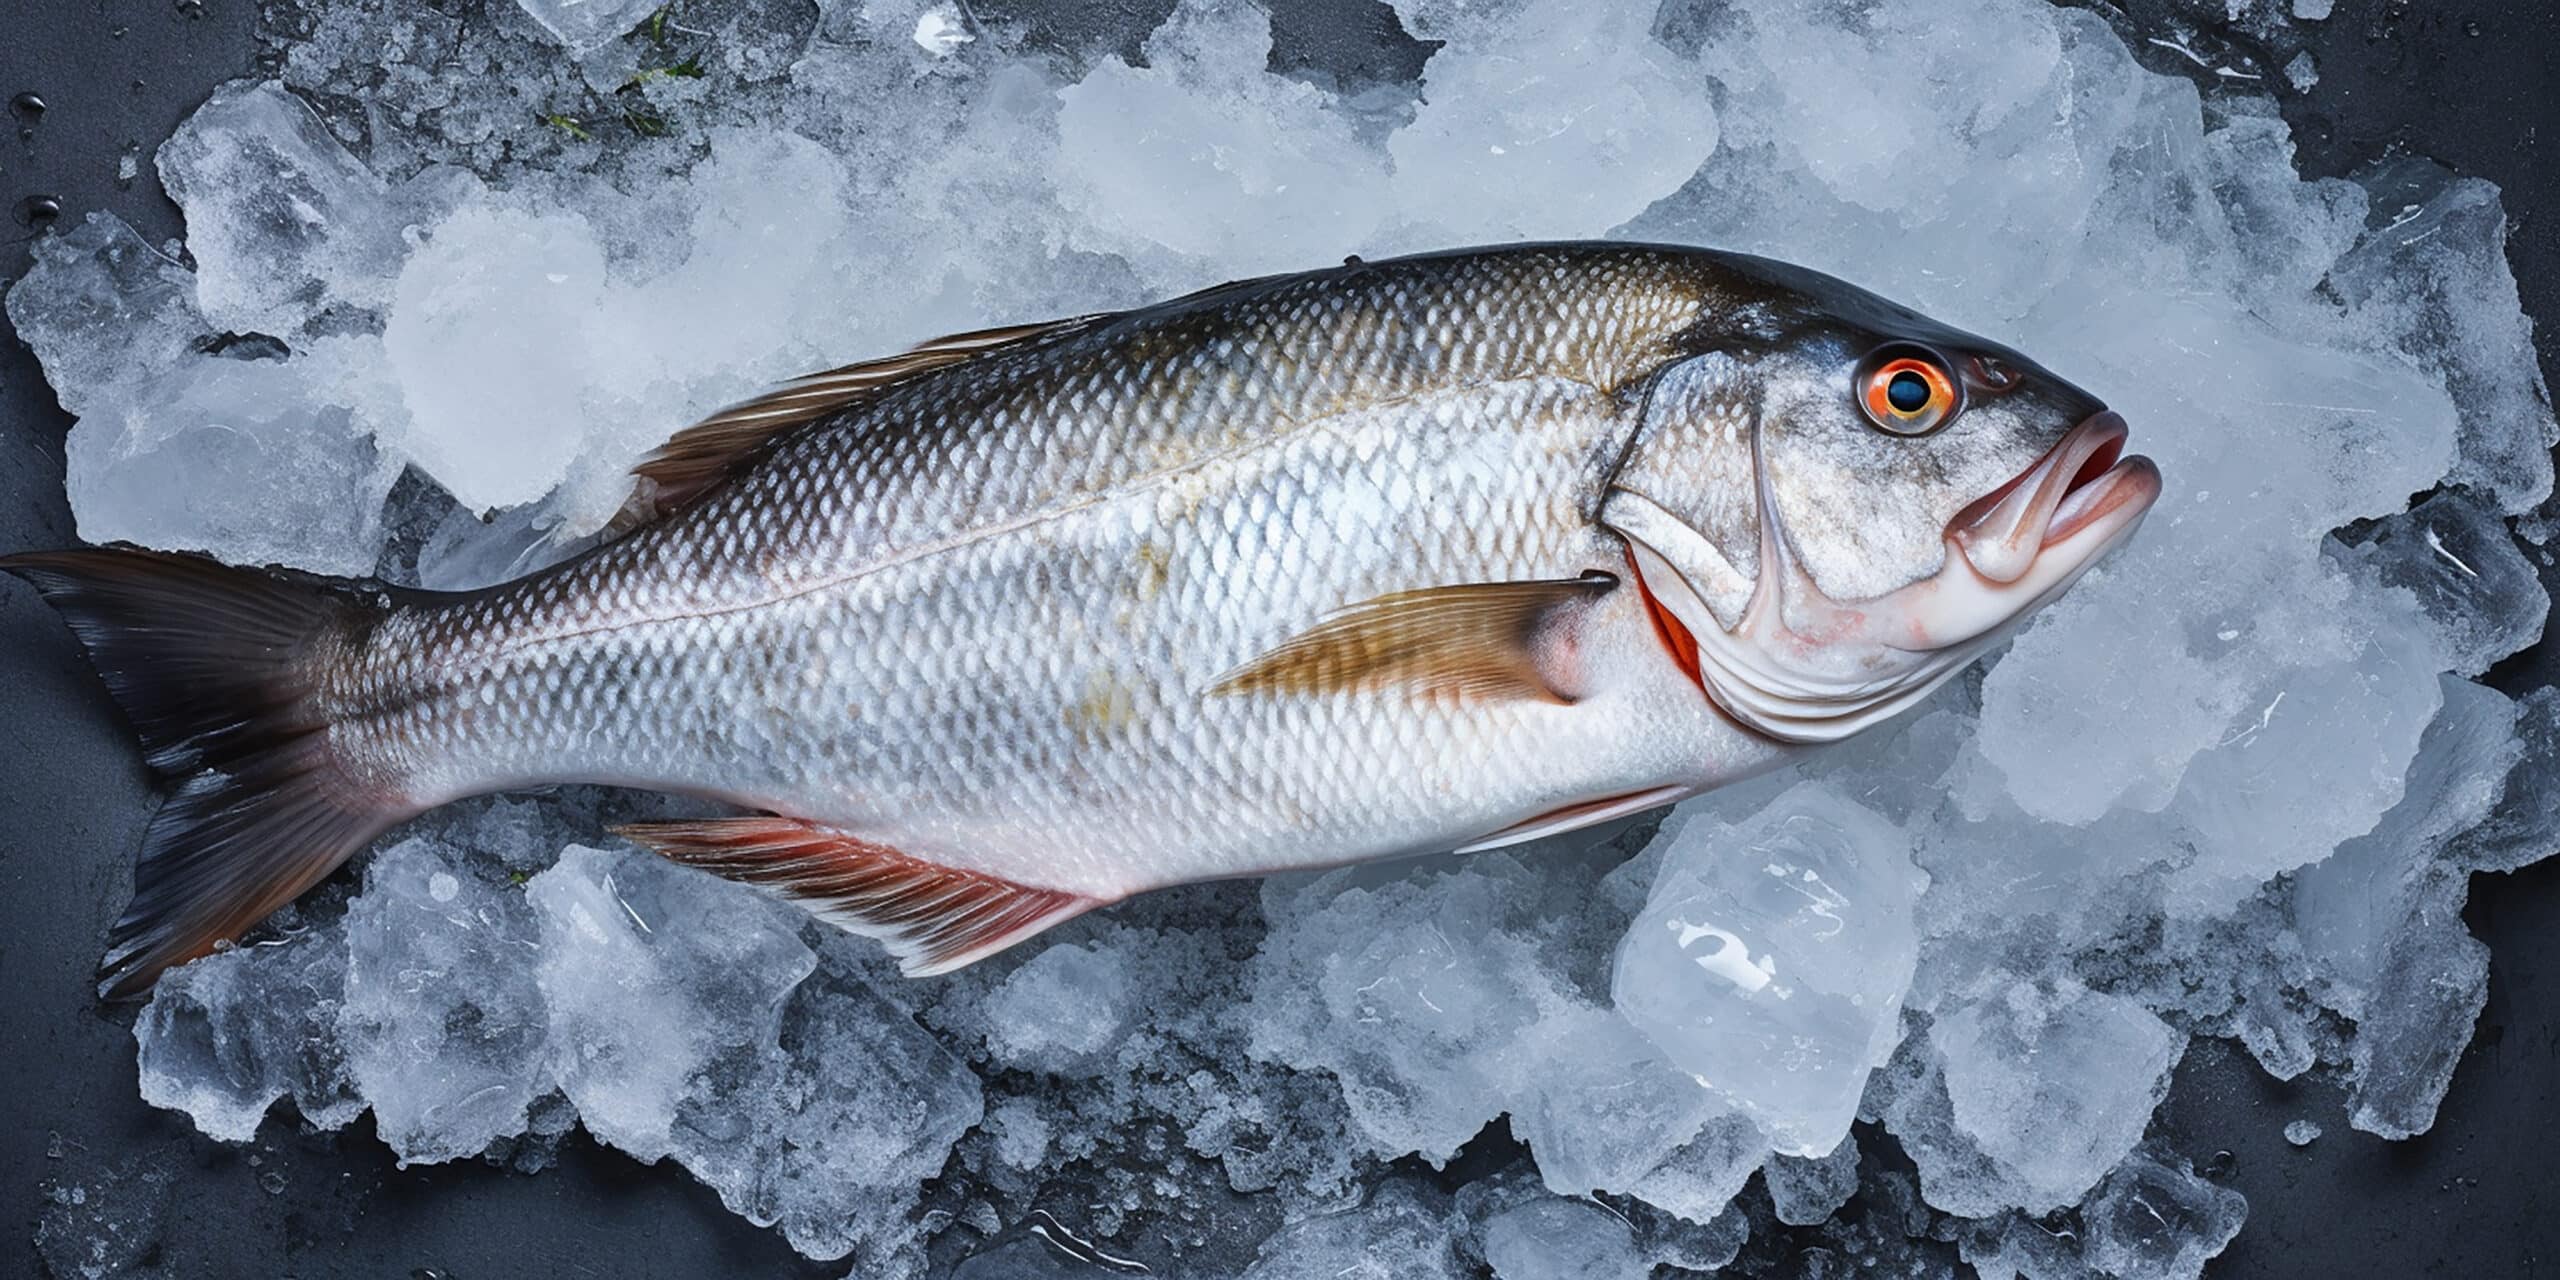 fanatic4fishing.com : Does live bait need to be refrigerated?